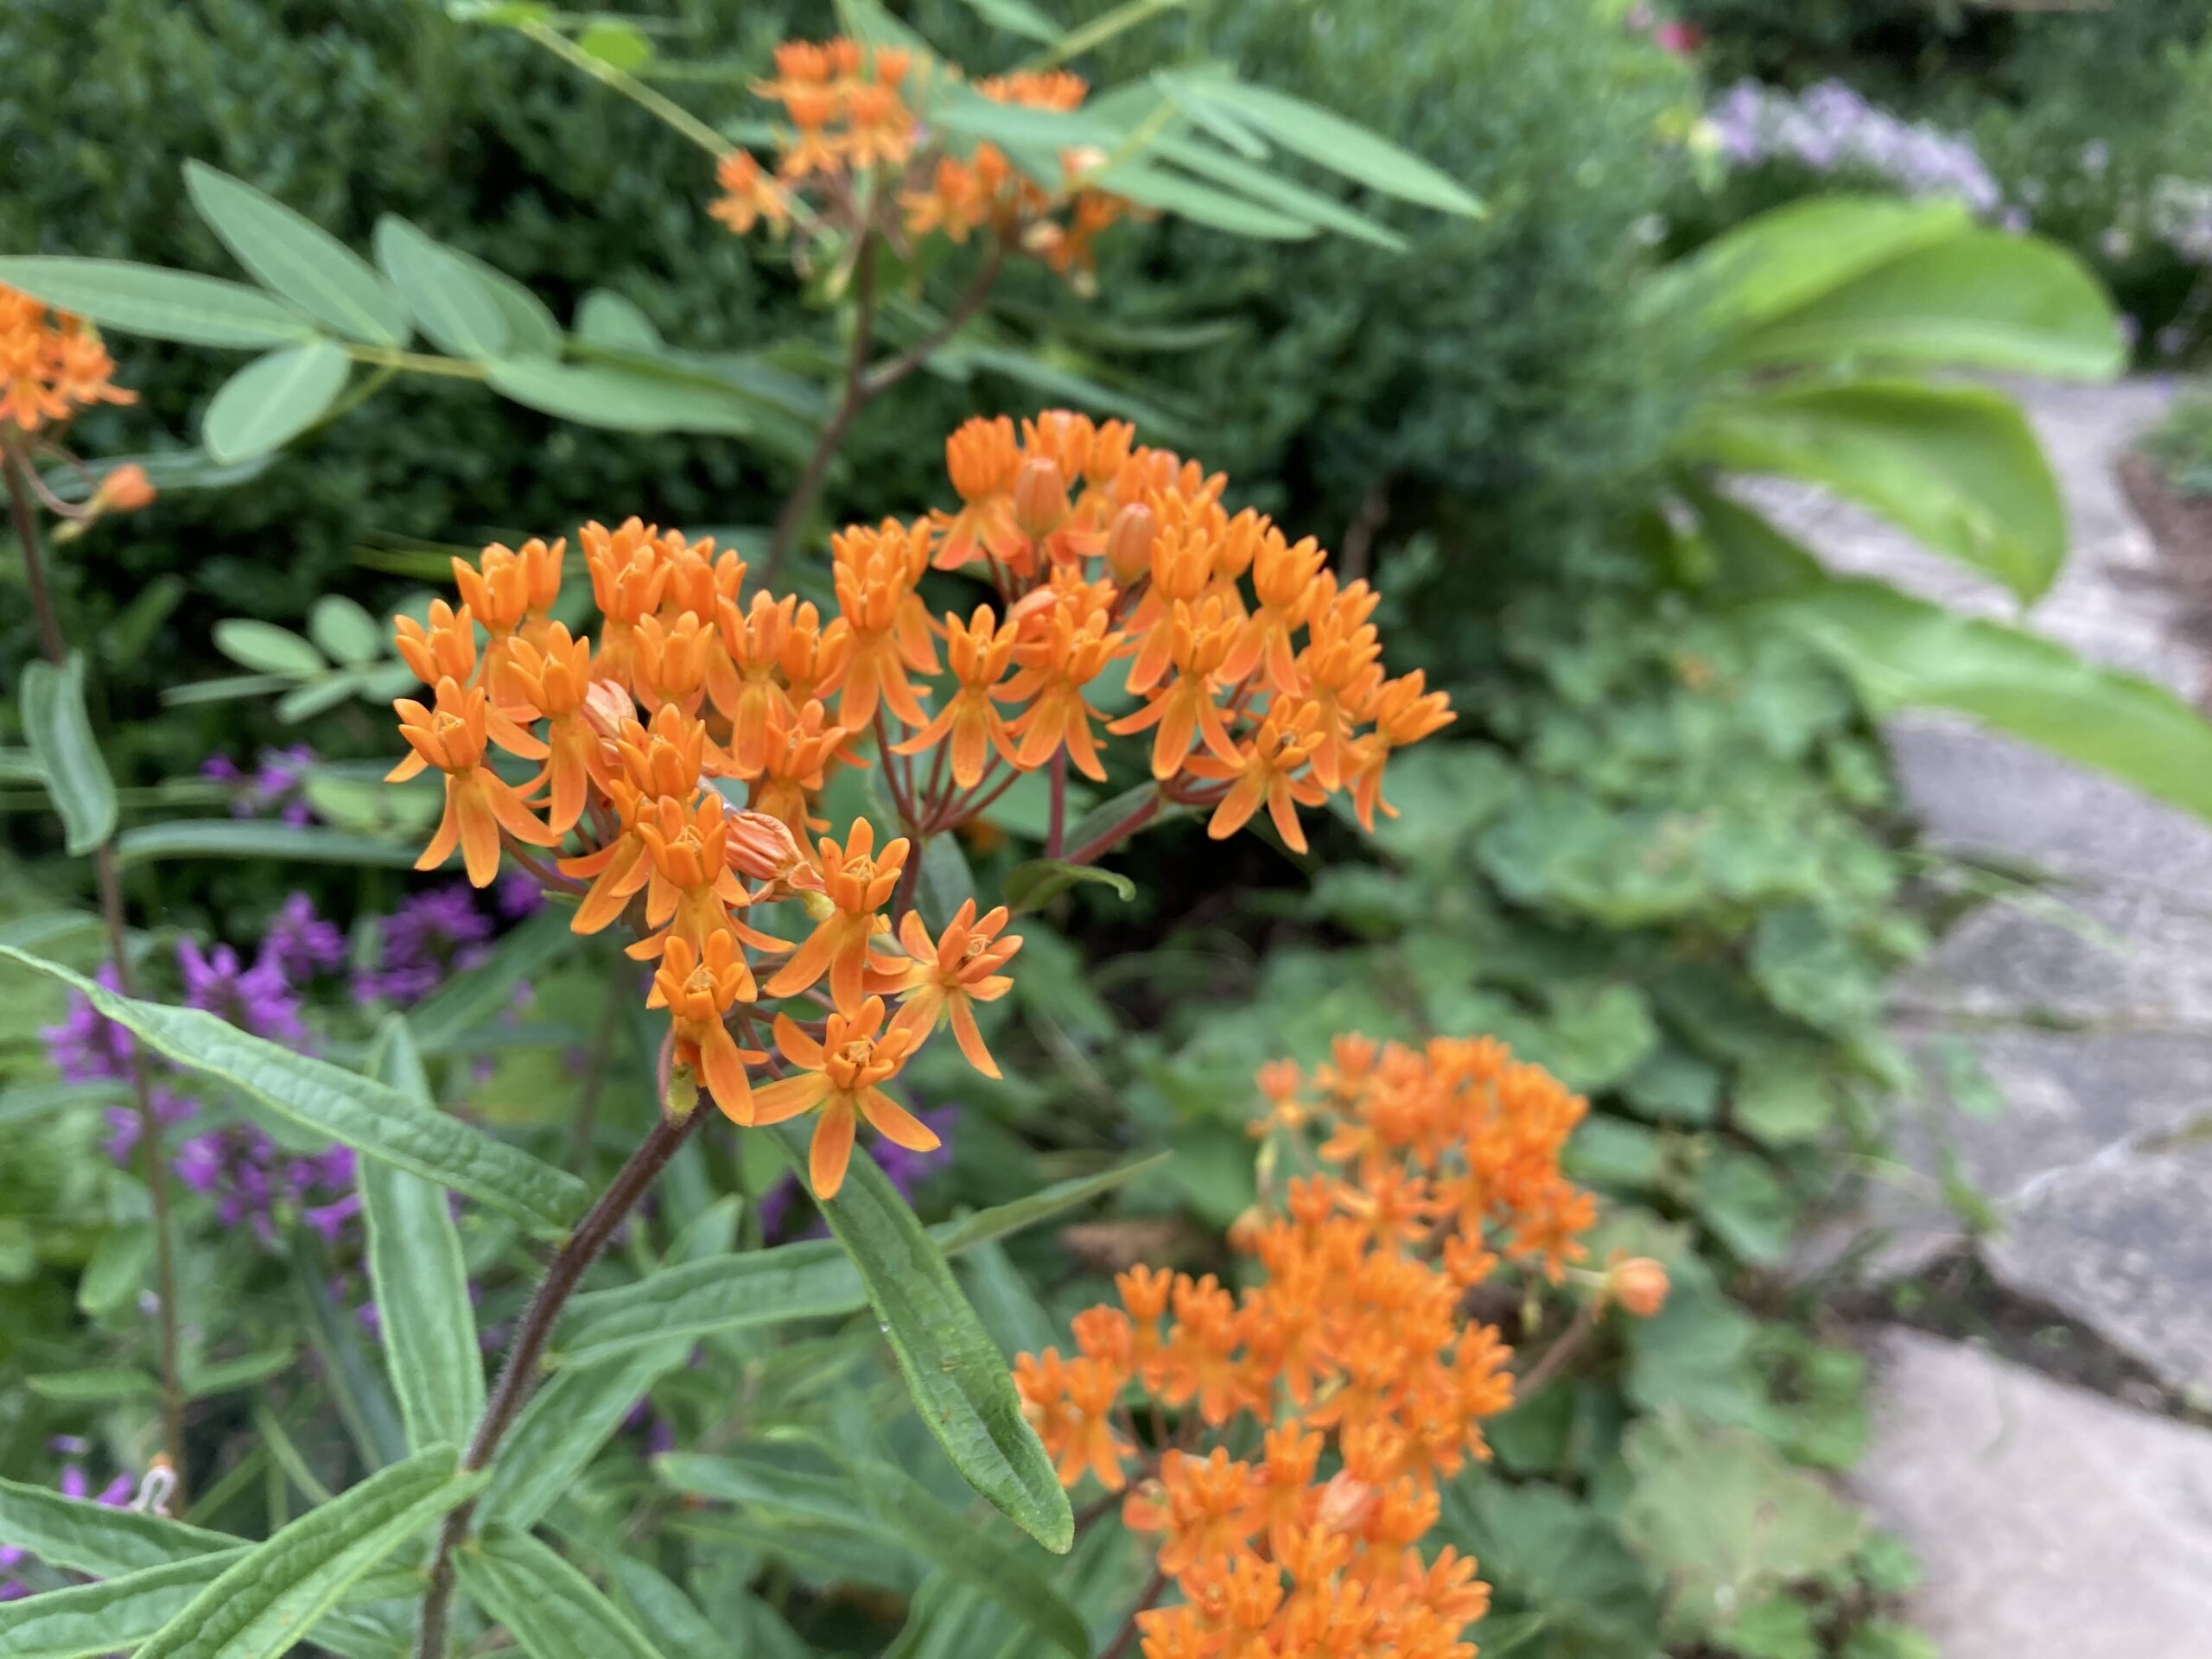 Asclepias tuberosa, commonly called butterfly weed.